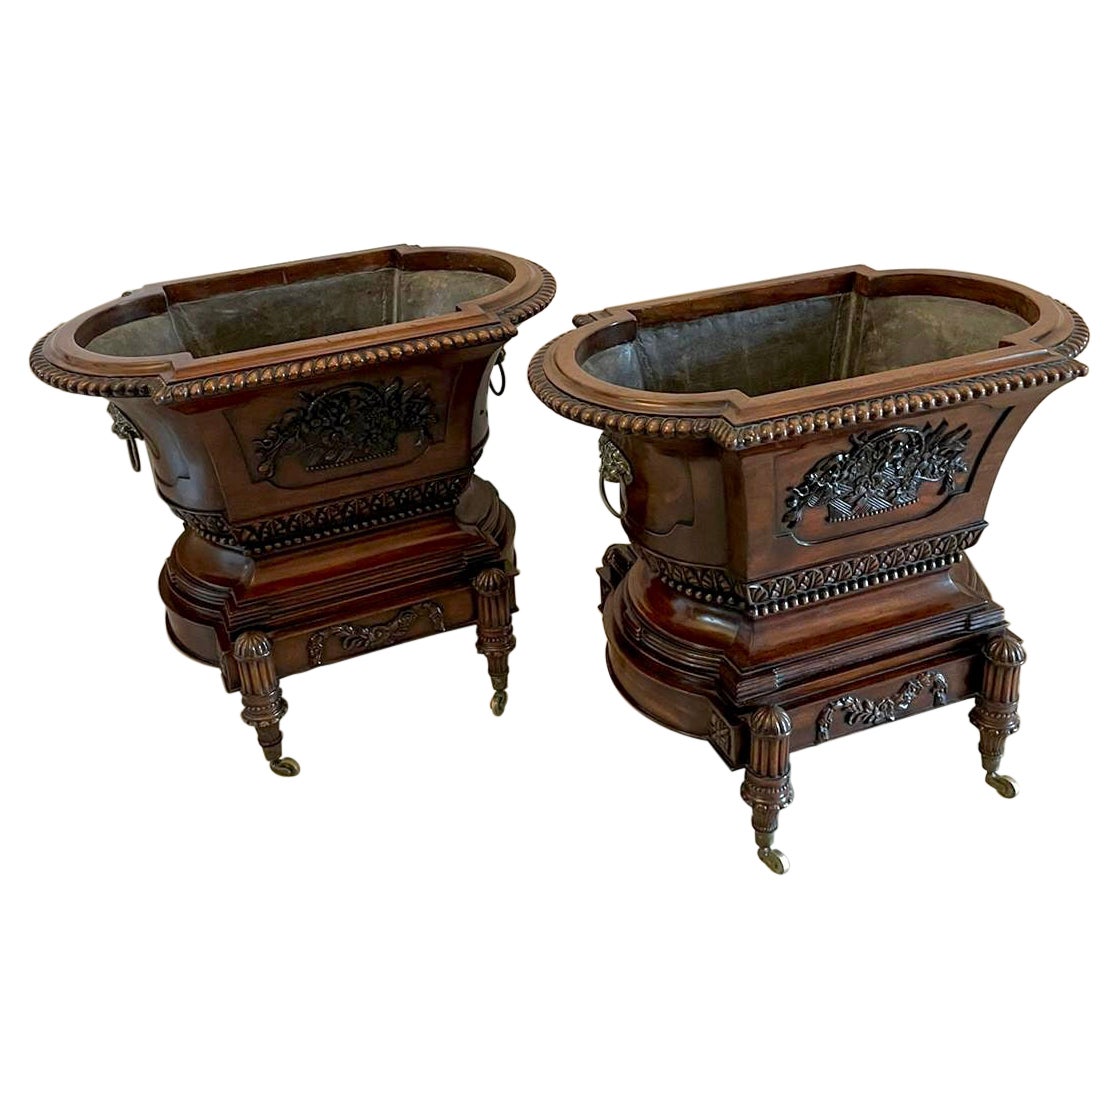 Outstanding Quality Pair of Antique Freestanding Carved Mahogany Wine Coolers